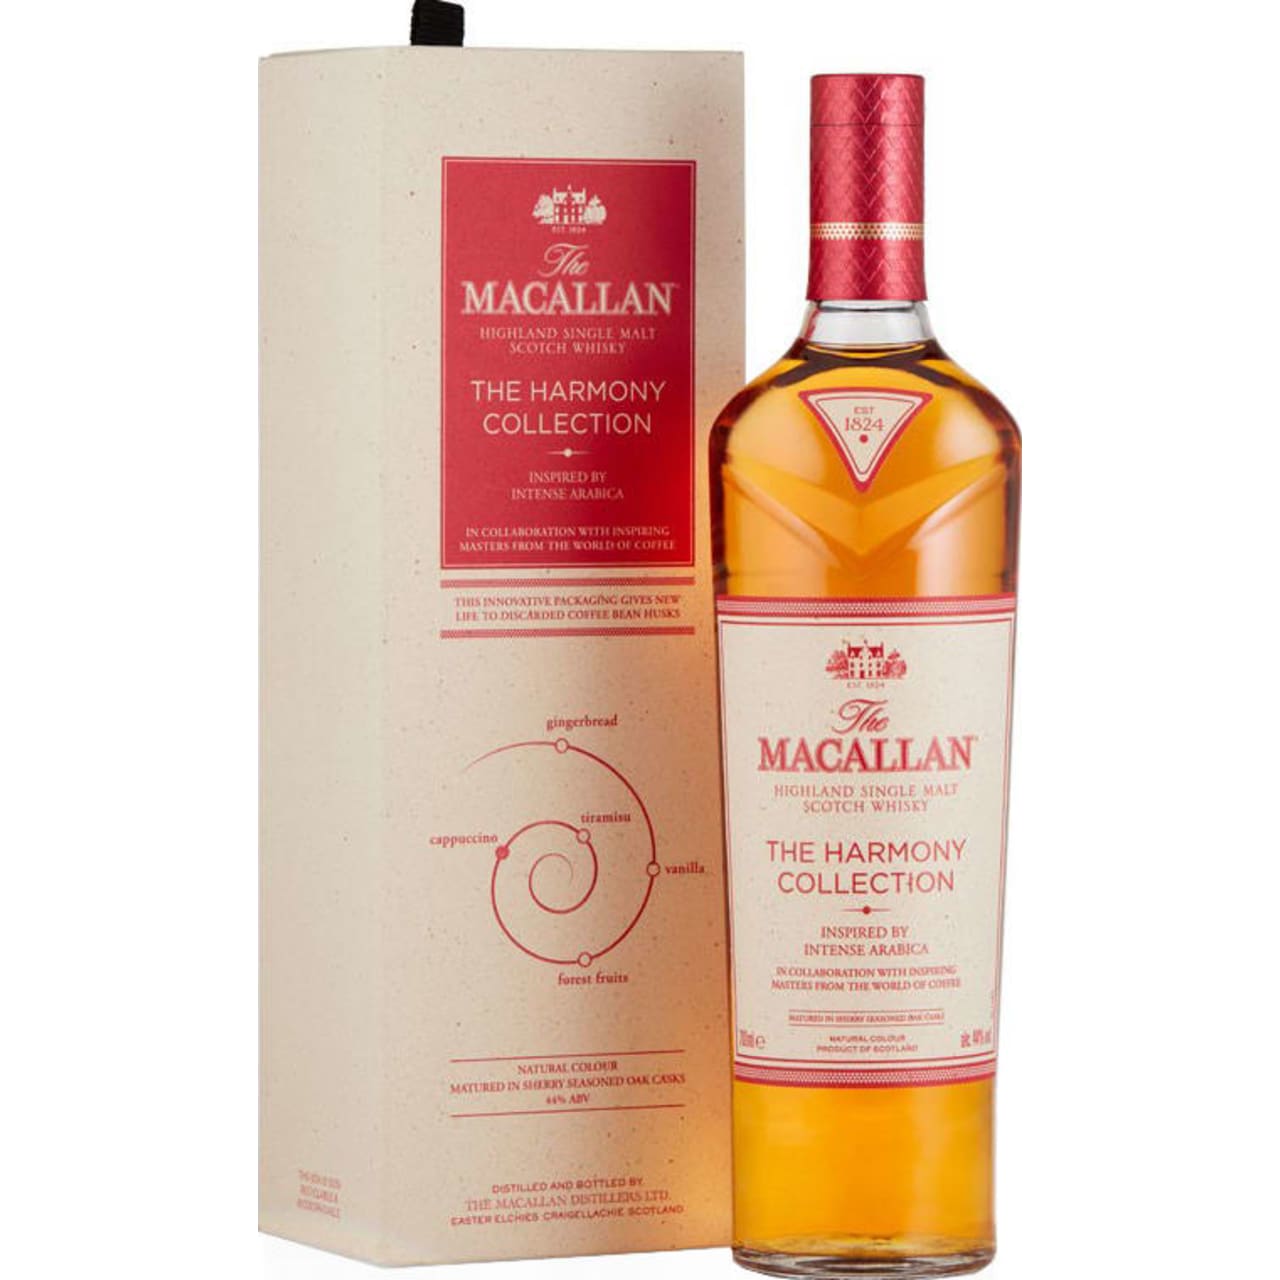 Product Image - The Macallan Harmony Collection Intense Arabica